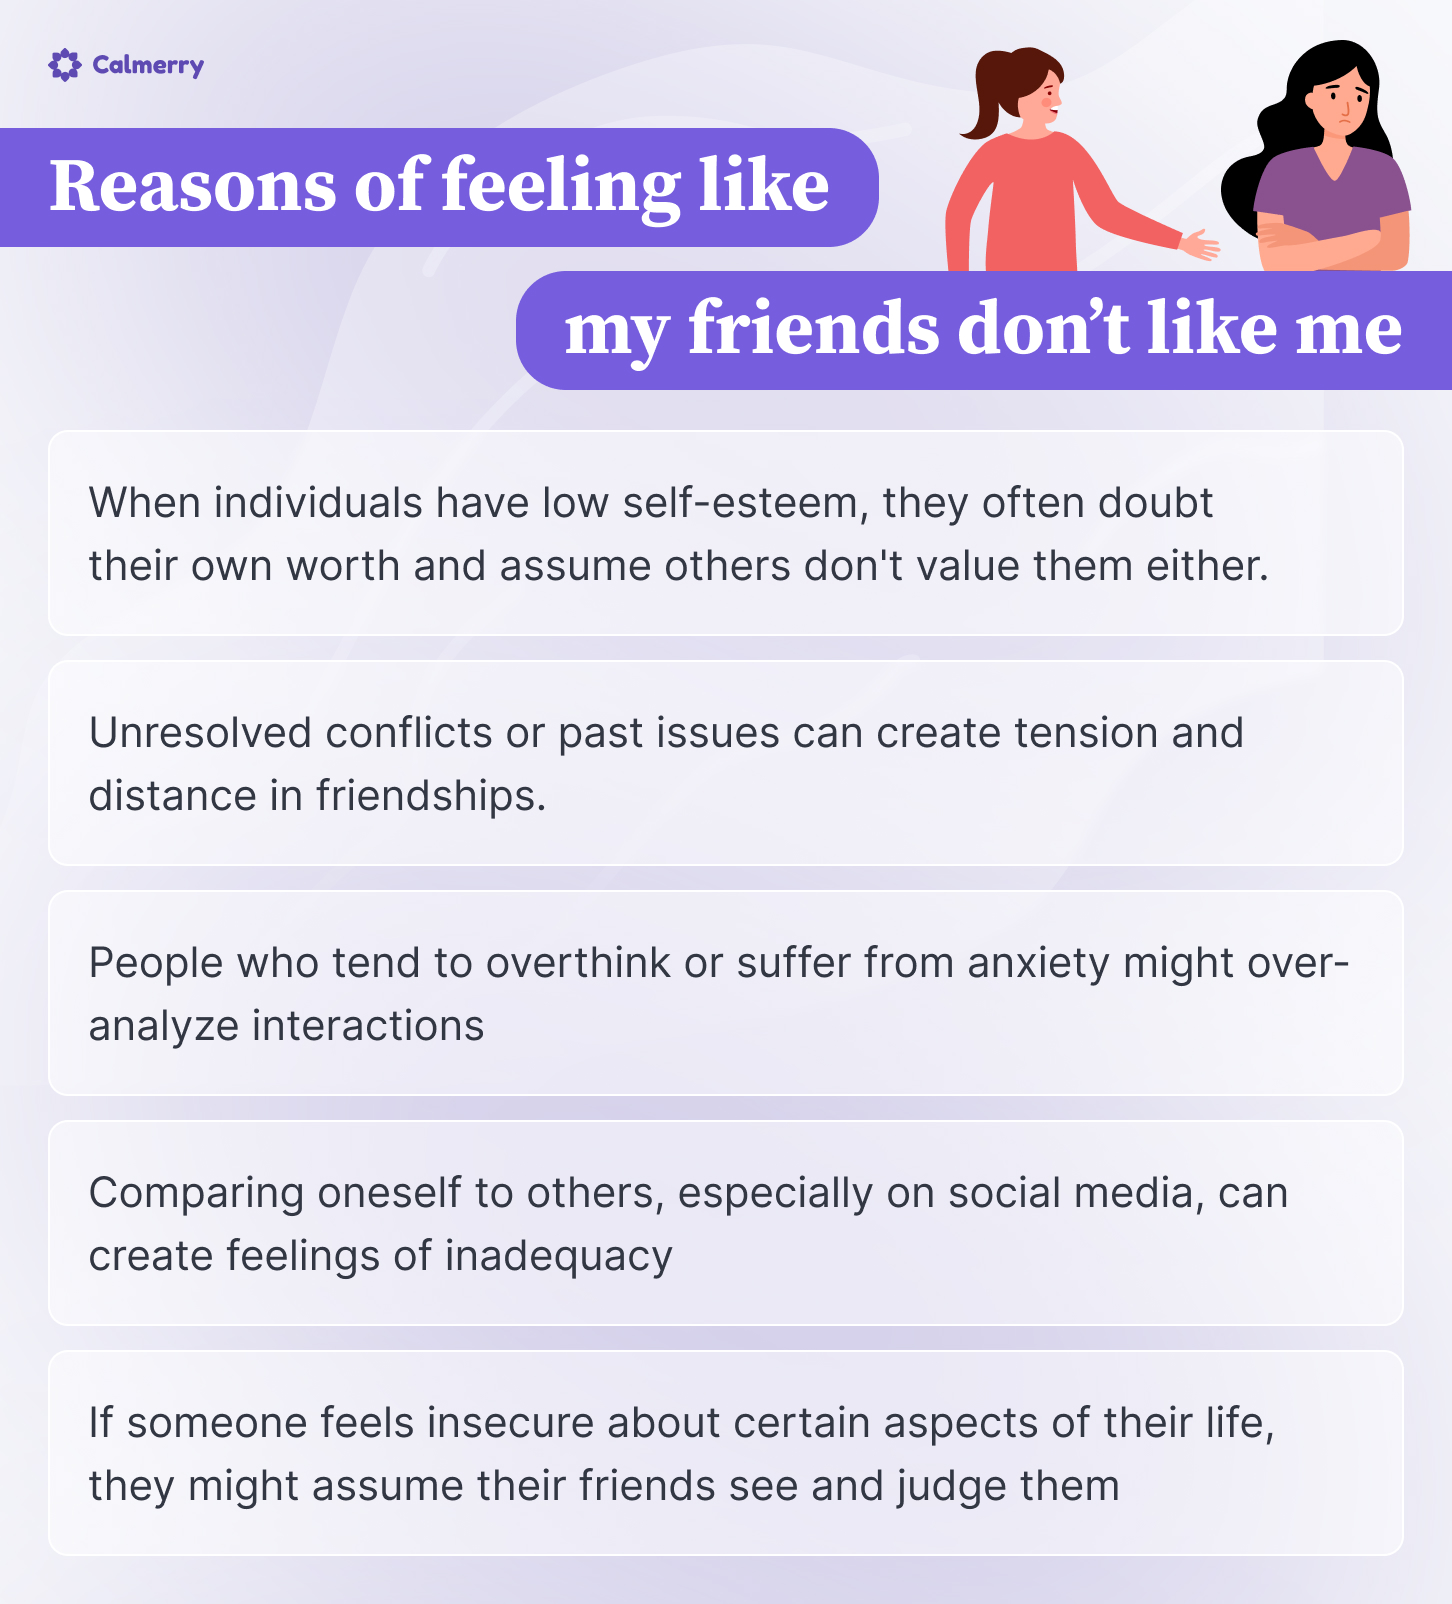 This image is an infographic titled "Reasons of feeling like my friends don't like me" from Calmerry, a mental health platform. It lists five reasons why someone might feel this way:
Low self-esteem leading to doubting one's own worth and assuming others don't value them.
Unresolved conflicts or past issues creating tension in friendships.
Overthinking or anxiety causing over-analysis of interactions.
Comparing oneself to others on social media creating feelings of inadequacy.
Insecurity about certain life aspects leading to assumptions of judgment from friends.
The infographic uses a purple color scheme and includes simple illustrations of two women, one reaching out to the other who appears more reserved. The layout is clean and easy to read, with each point presented in a separate text box.